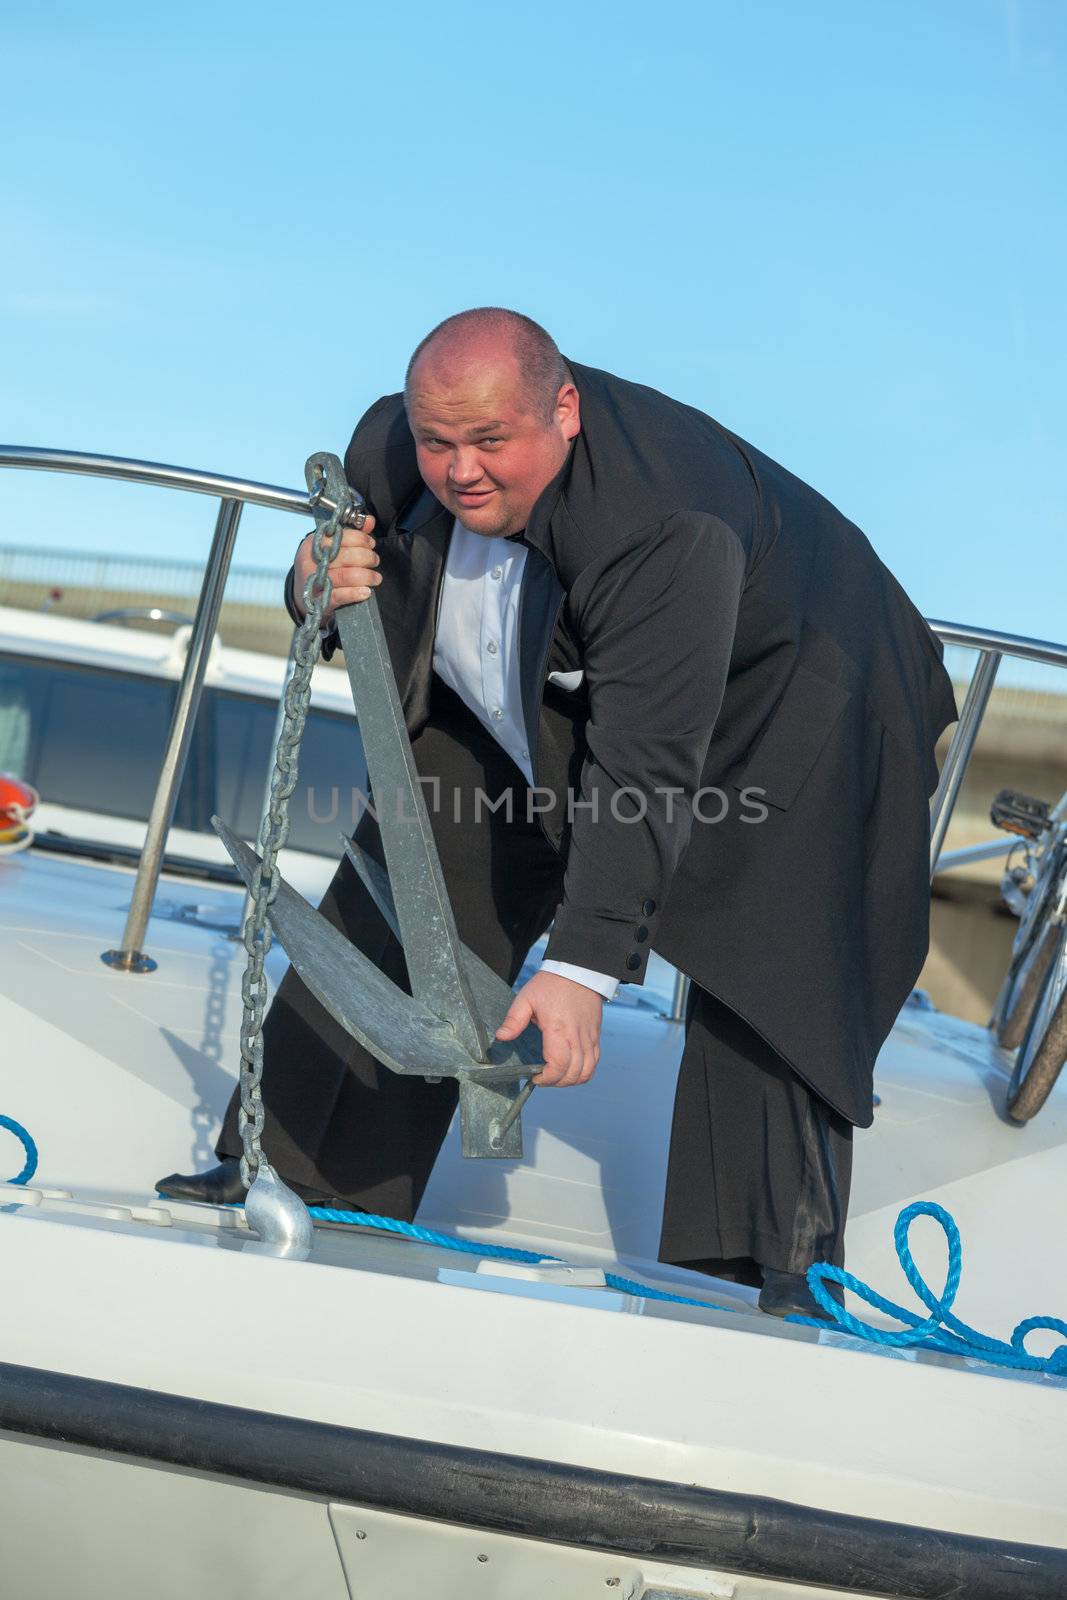 Fat man in tuxedo lifting an anchor by Discovod